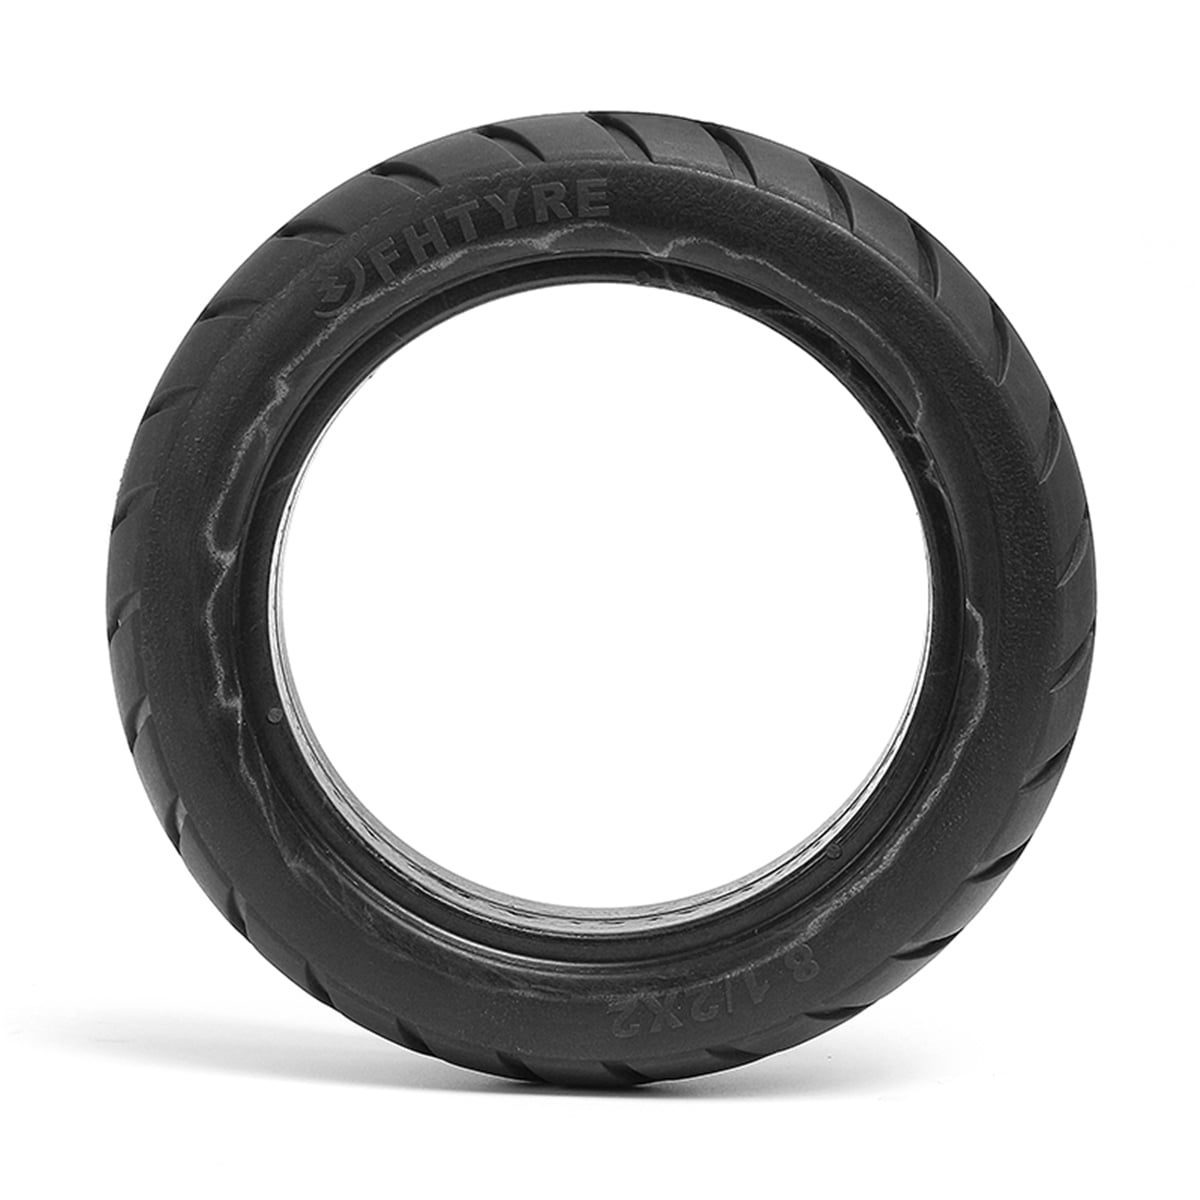 Black Micropores Solid Tyres Parts Kit For Xiaomi Mijia M365 Electric Scooter 